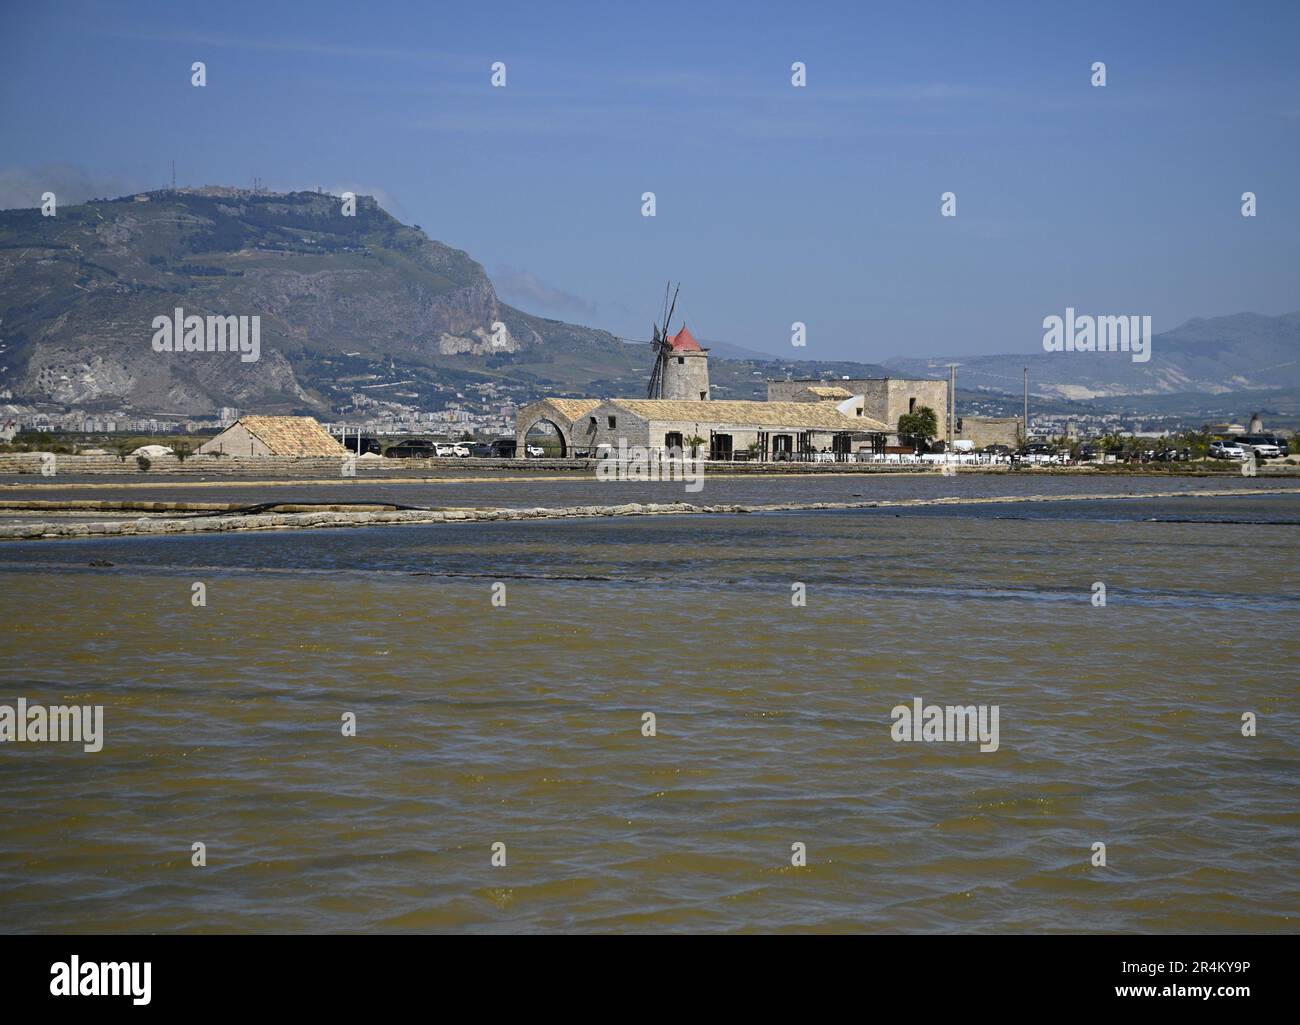 https://c8.alamy.com/comp/2R4KY9P/landscape-with-scenic-view-of-a-traditional-mill-in-the-salt-pan-salina-calcara-nubia-natural-reserve-of-trapani-and-paceco-sicily-2R4KY9P.jpg